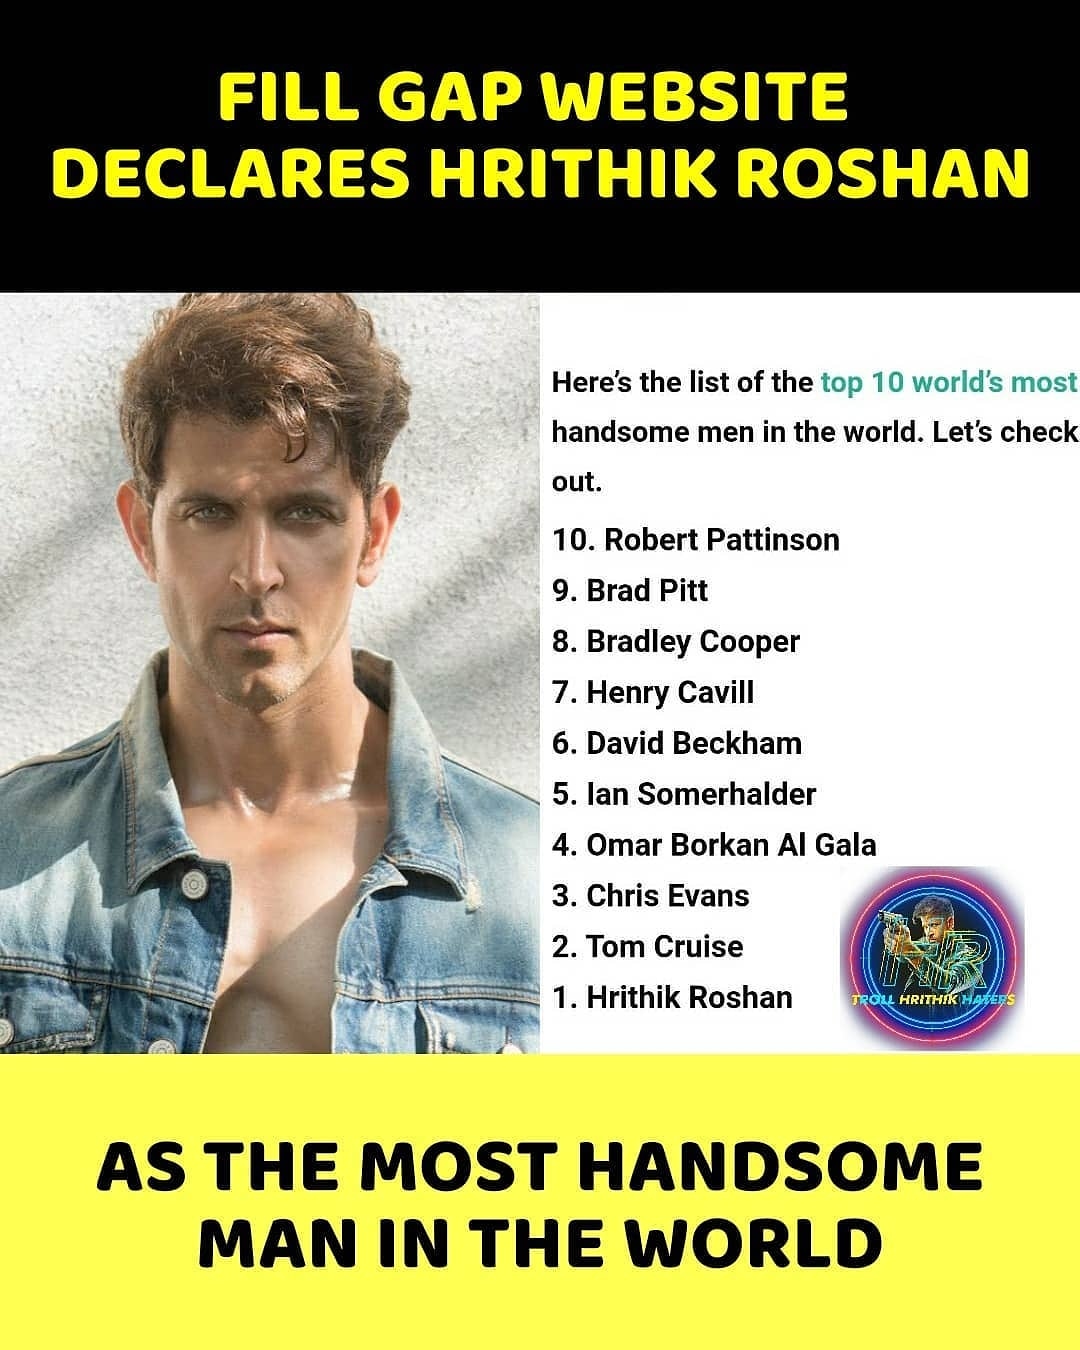 Well, it's broccoli: Hrithik Roshan jokes about the secret behind his good  looks after being named as the 'Most Handsome Man in the World